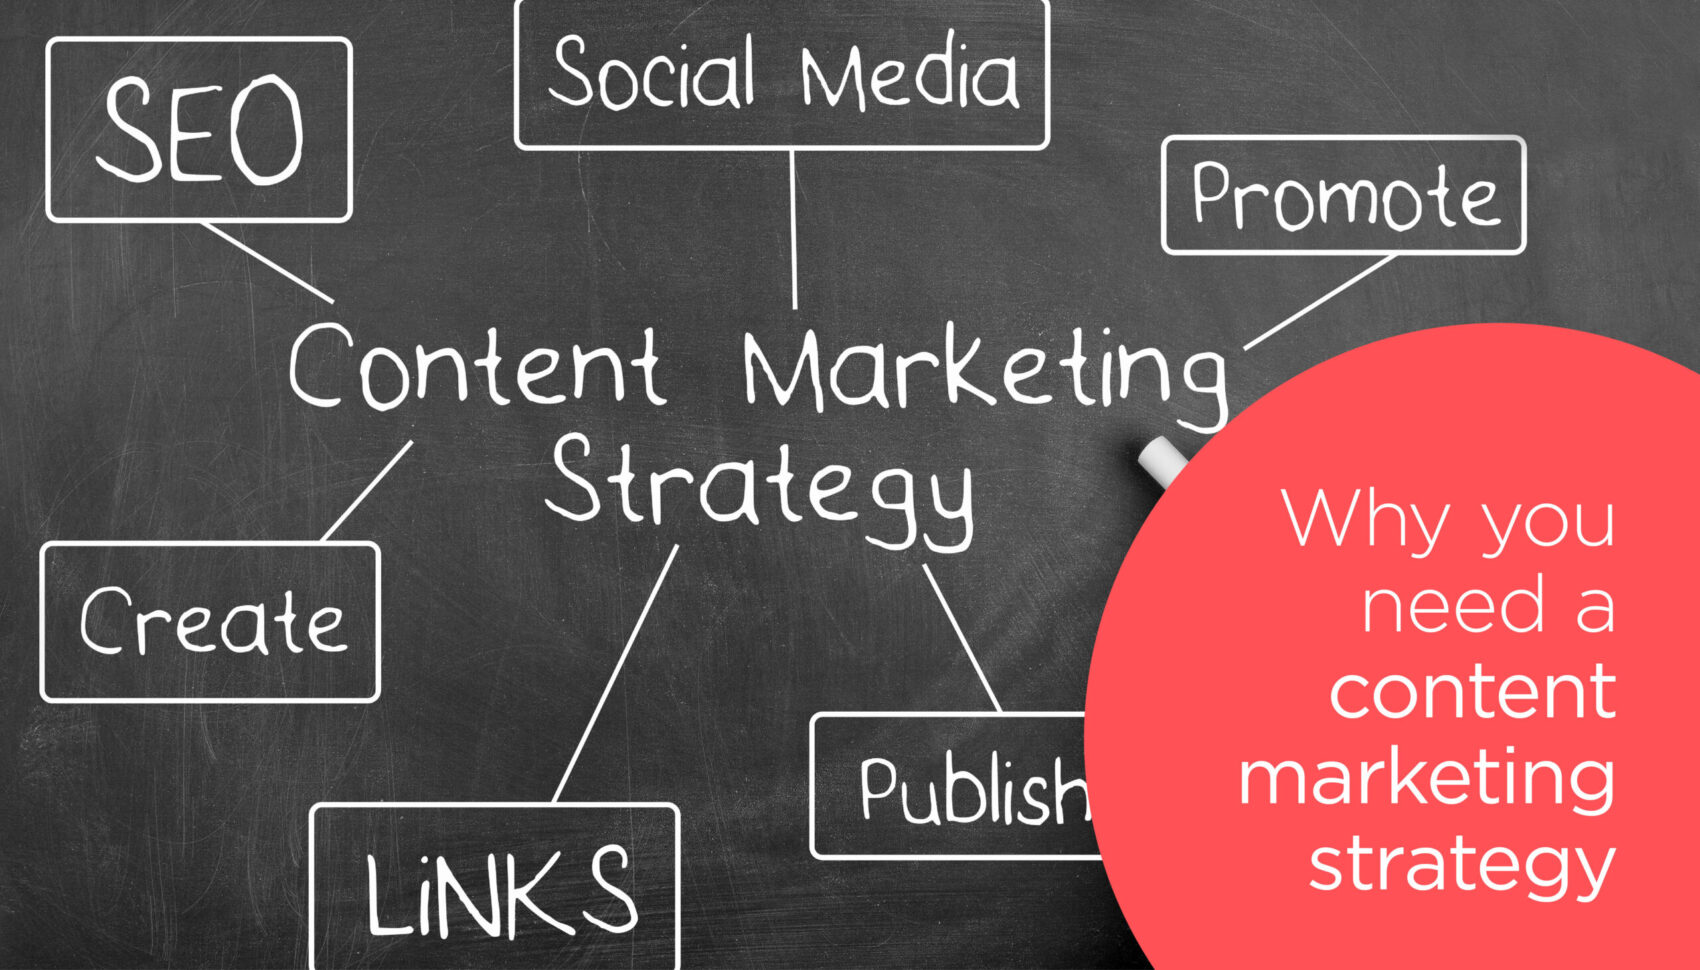 Why you need a Content Marketing Strategy